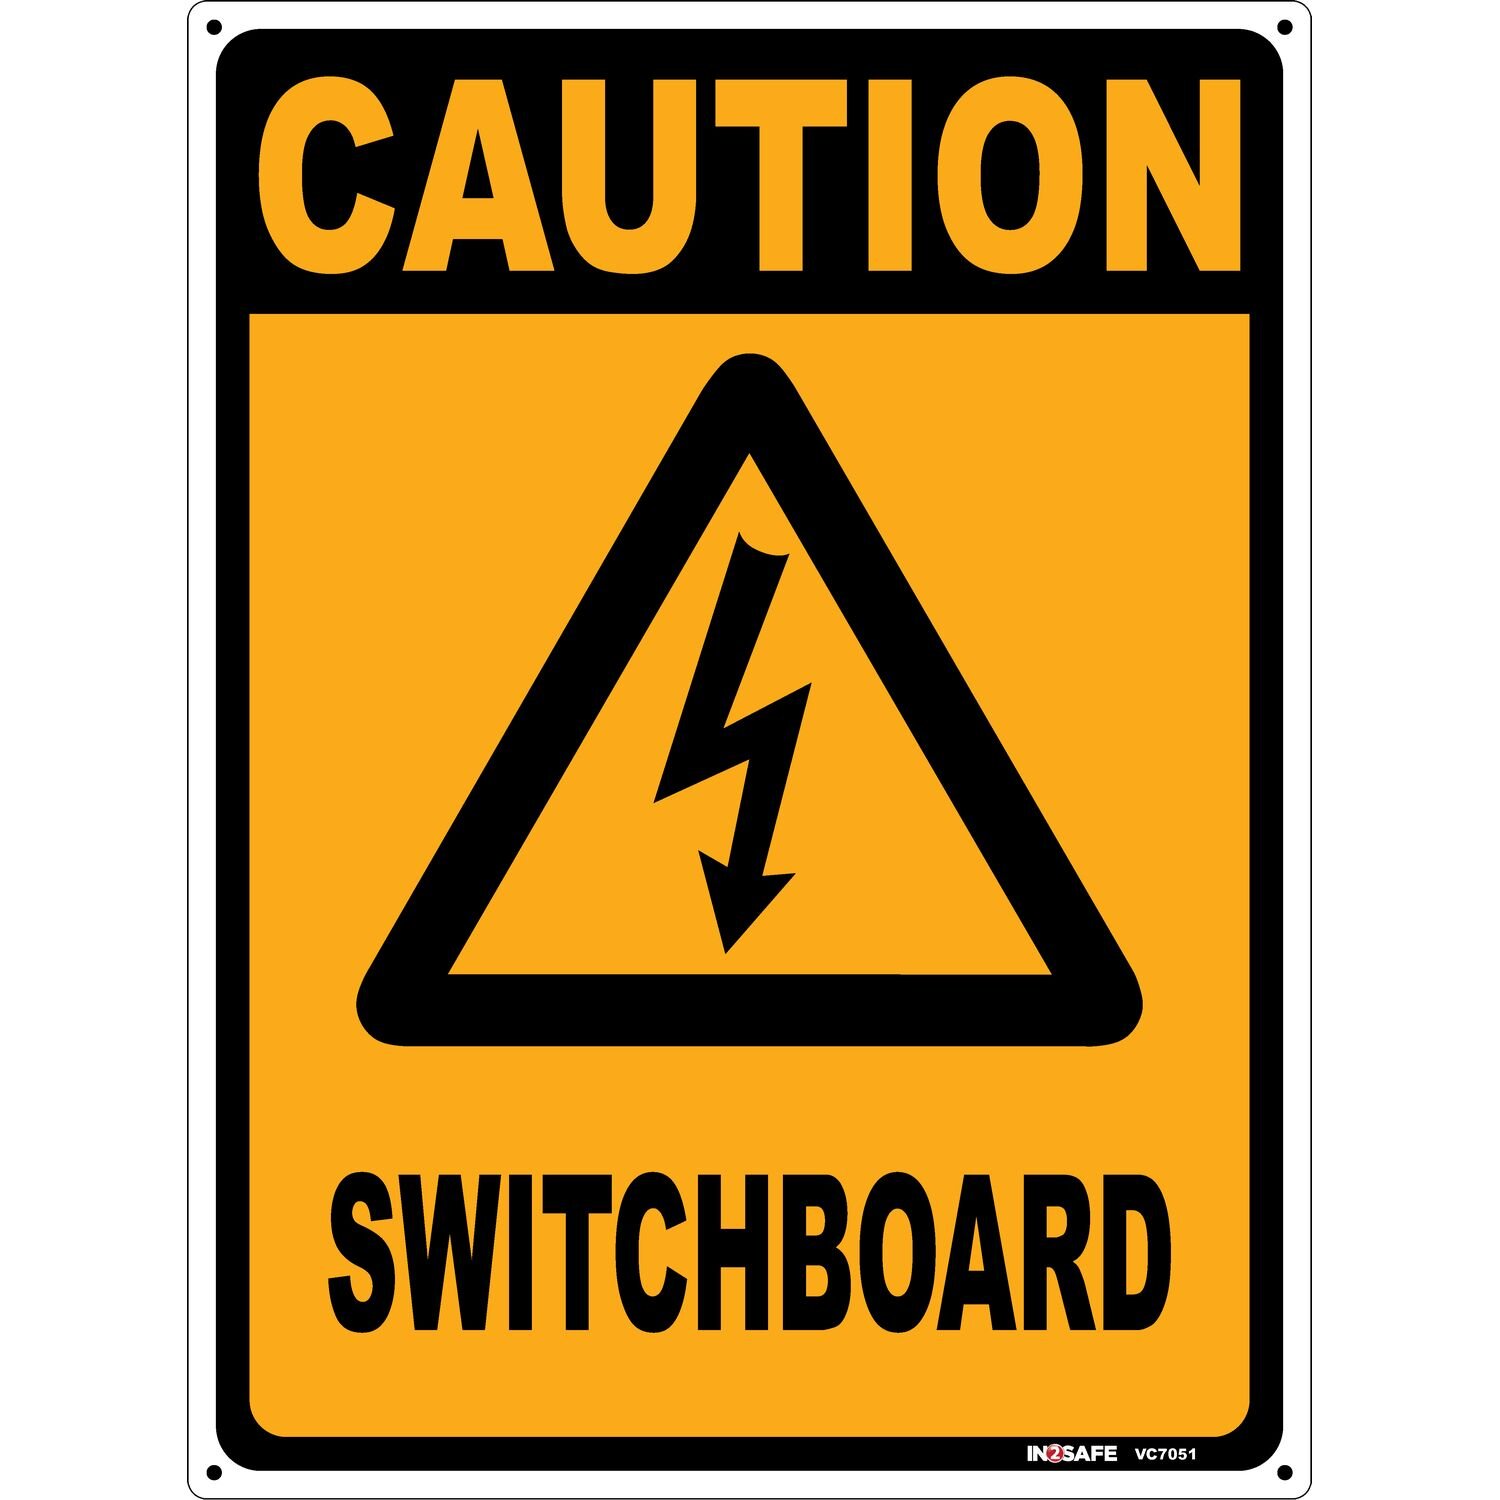 CAUTION Switchboard